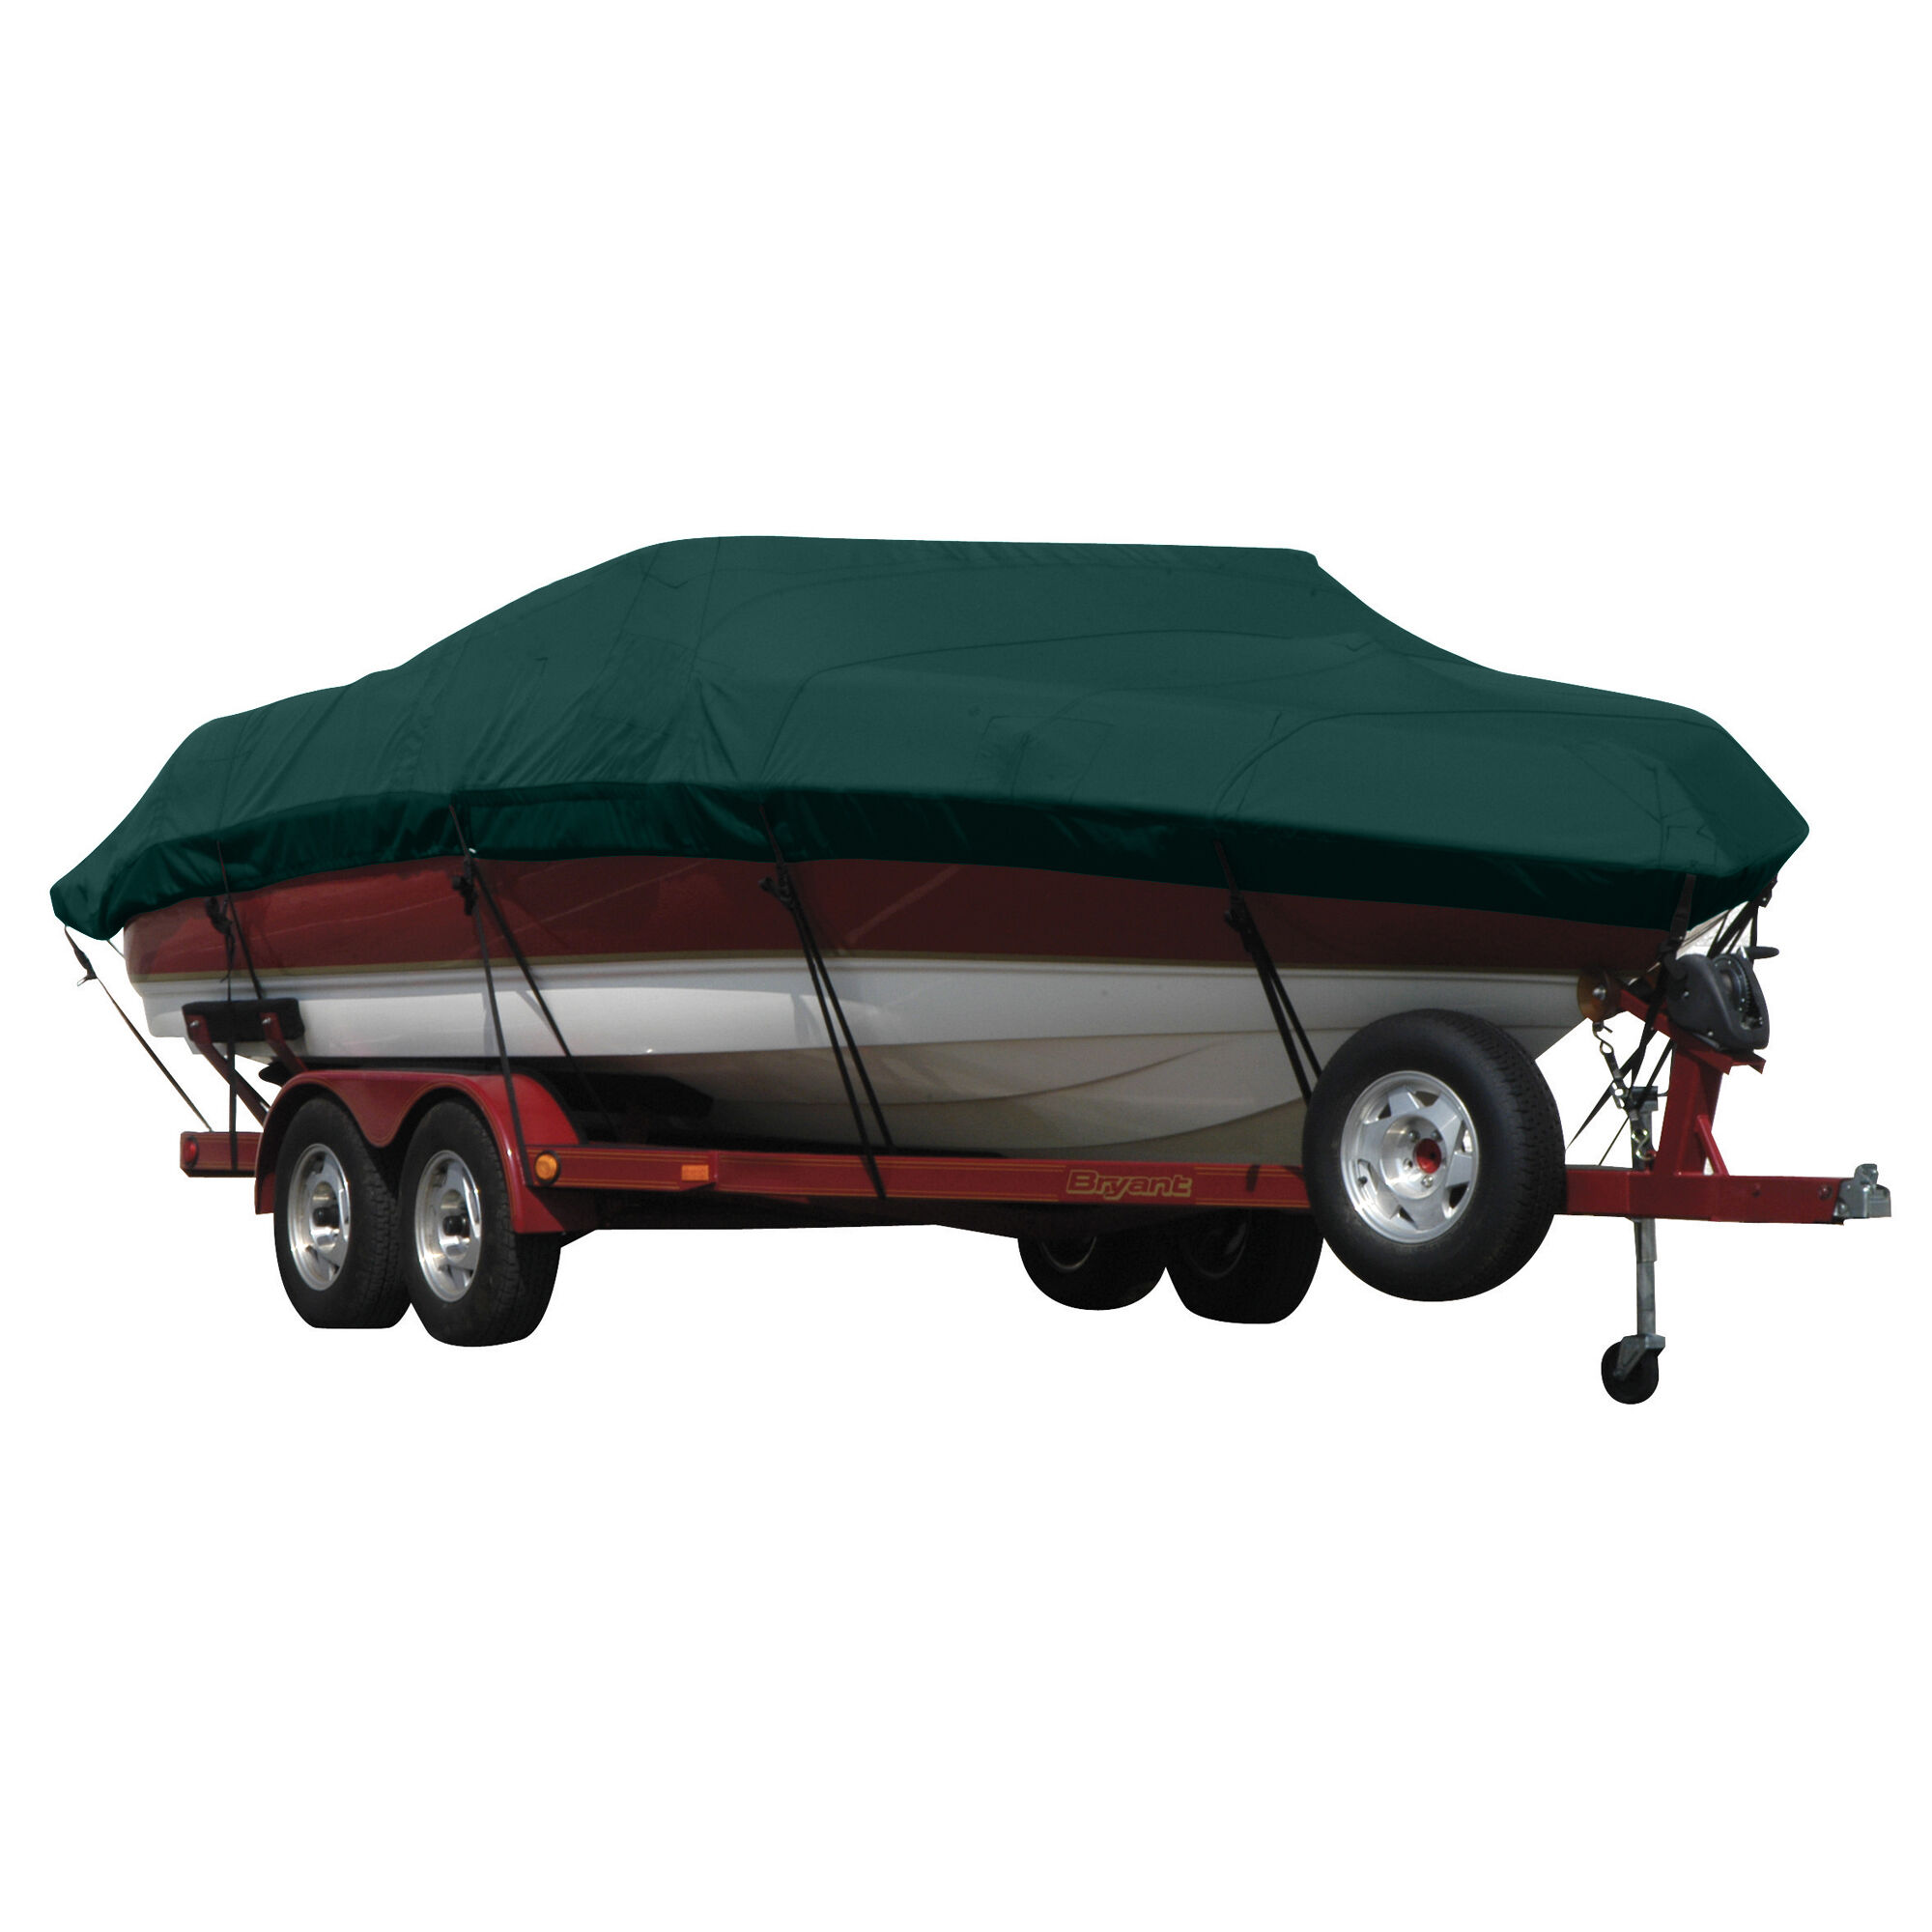 Covermate Exact Fit Sunbrella Boat Cover for Procraft 180 180 Side Console w/ Shield w/ Port Trolling Motor O/B. Forest Green